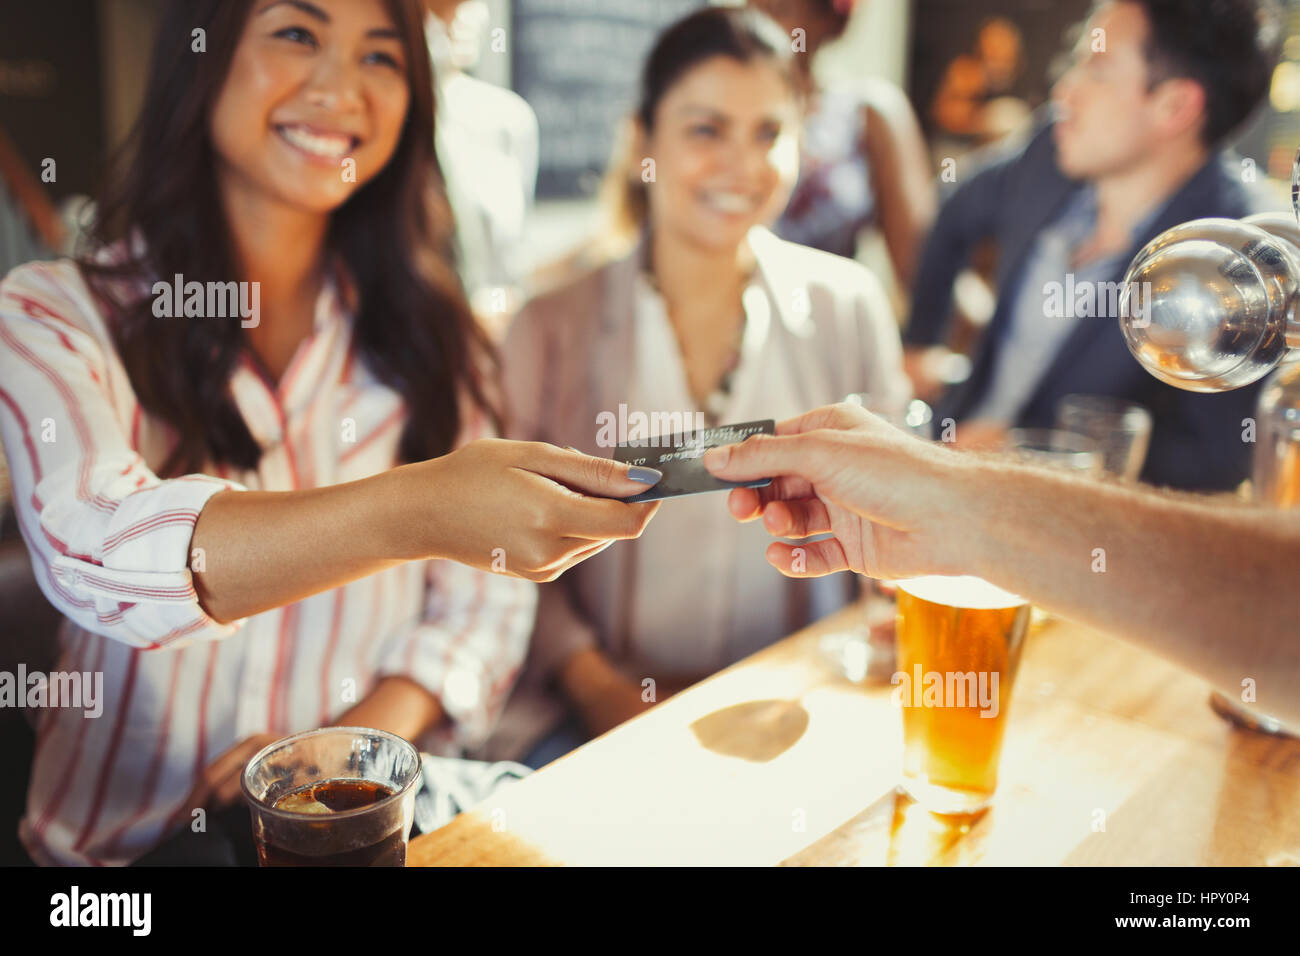 Smiling woman paying bartender with credit card at bar Stock Photo